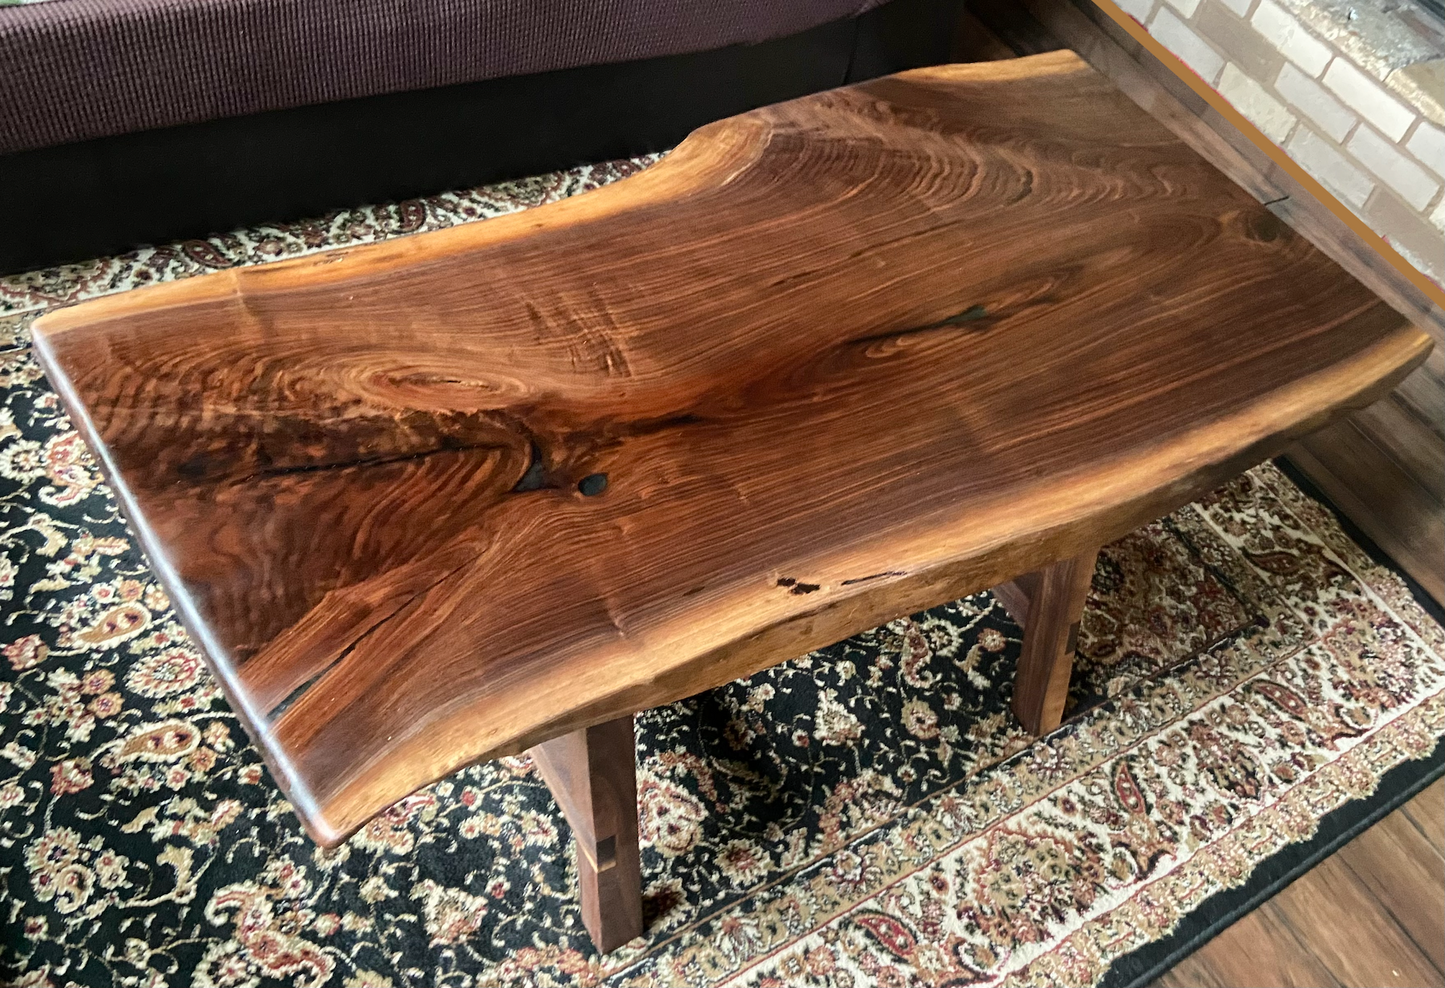 Slightly Forked Live Edge Black Walnut Coffee Table with High Figure and Vibrant Grain Patterns